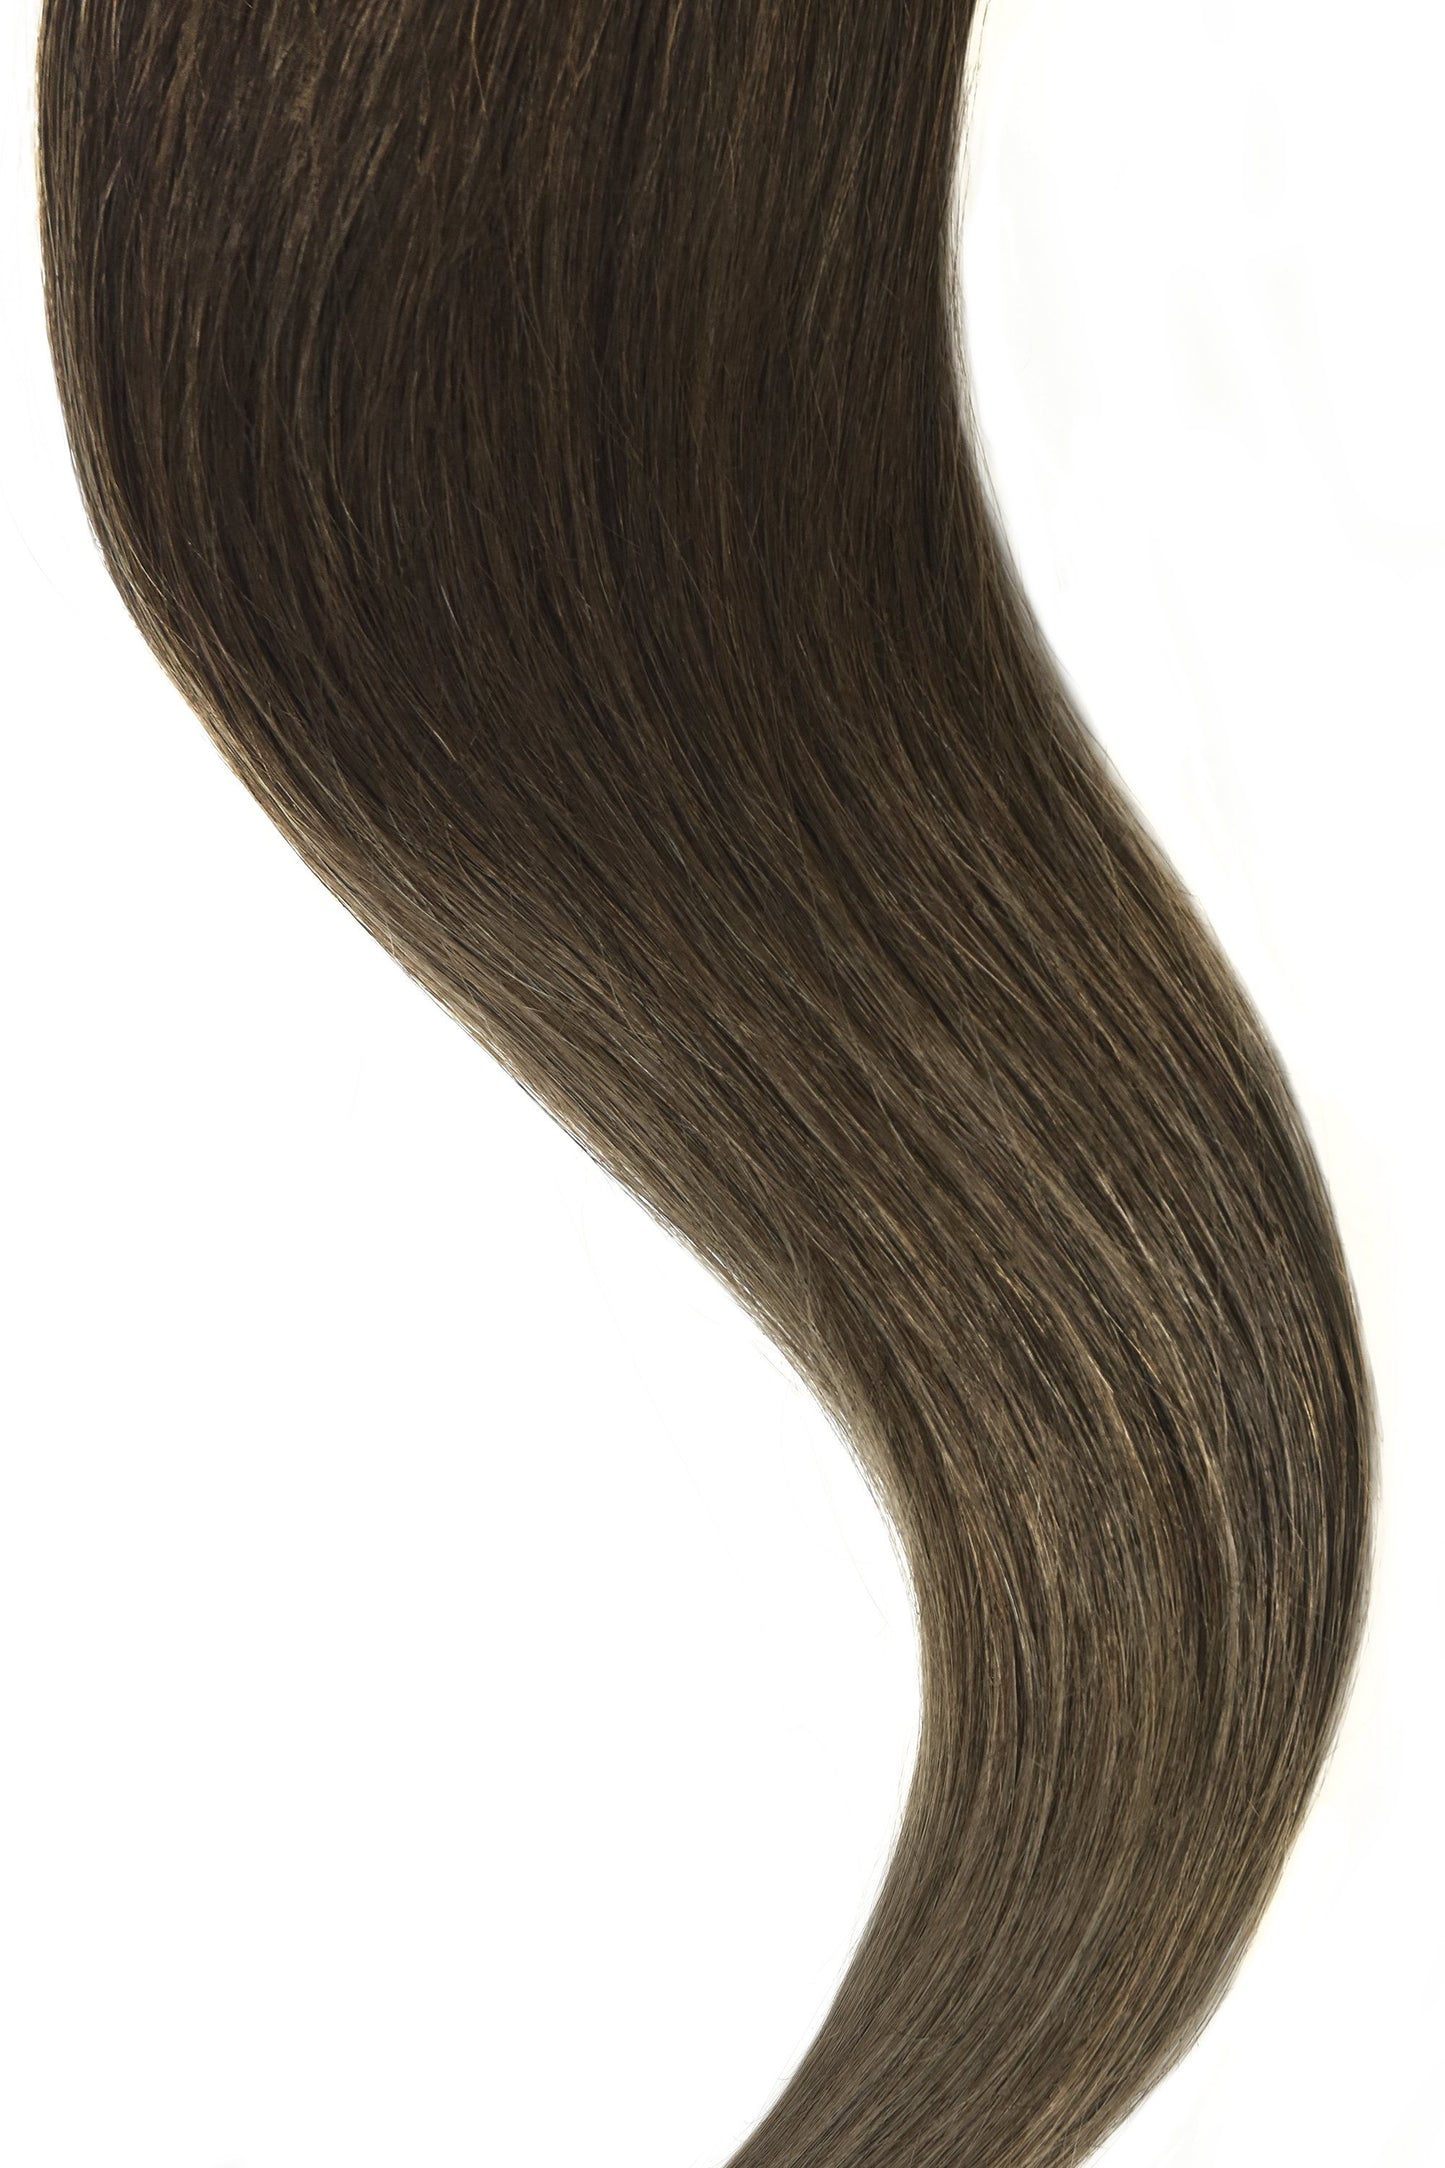 Tape in Remy Human Hair Extensions - #9 Tape in Hair Extensions cliphair 